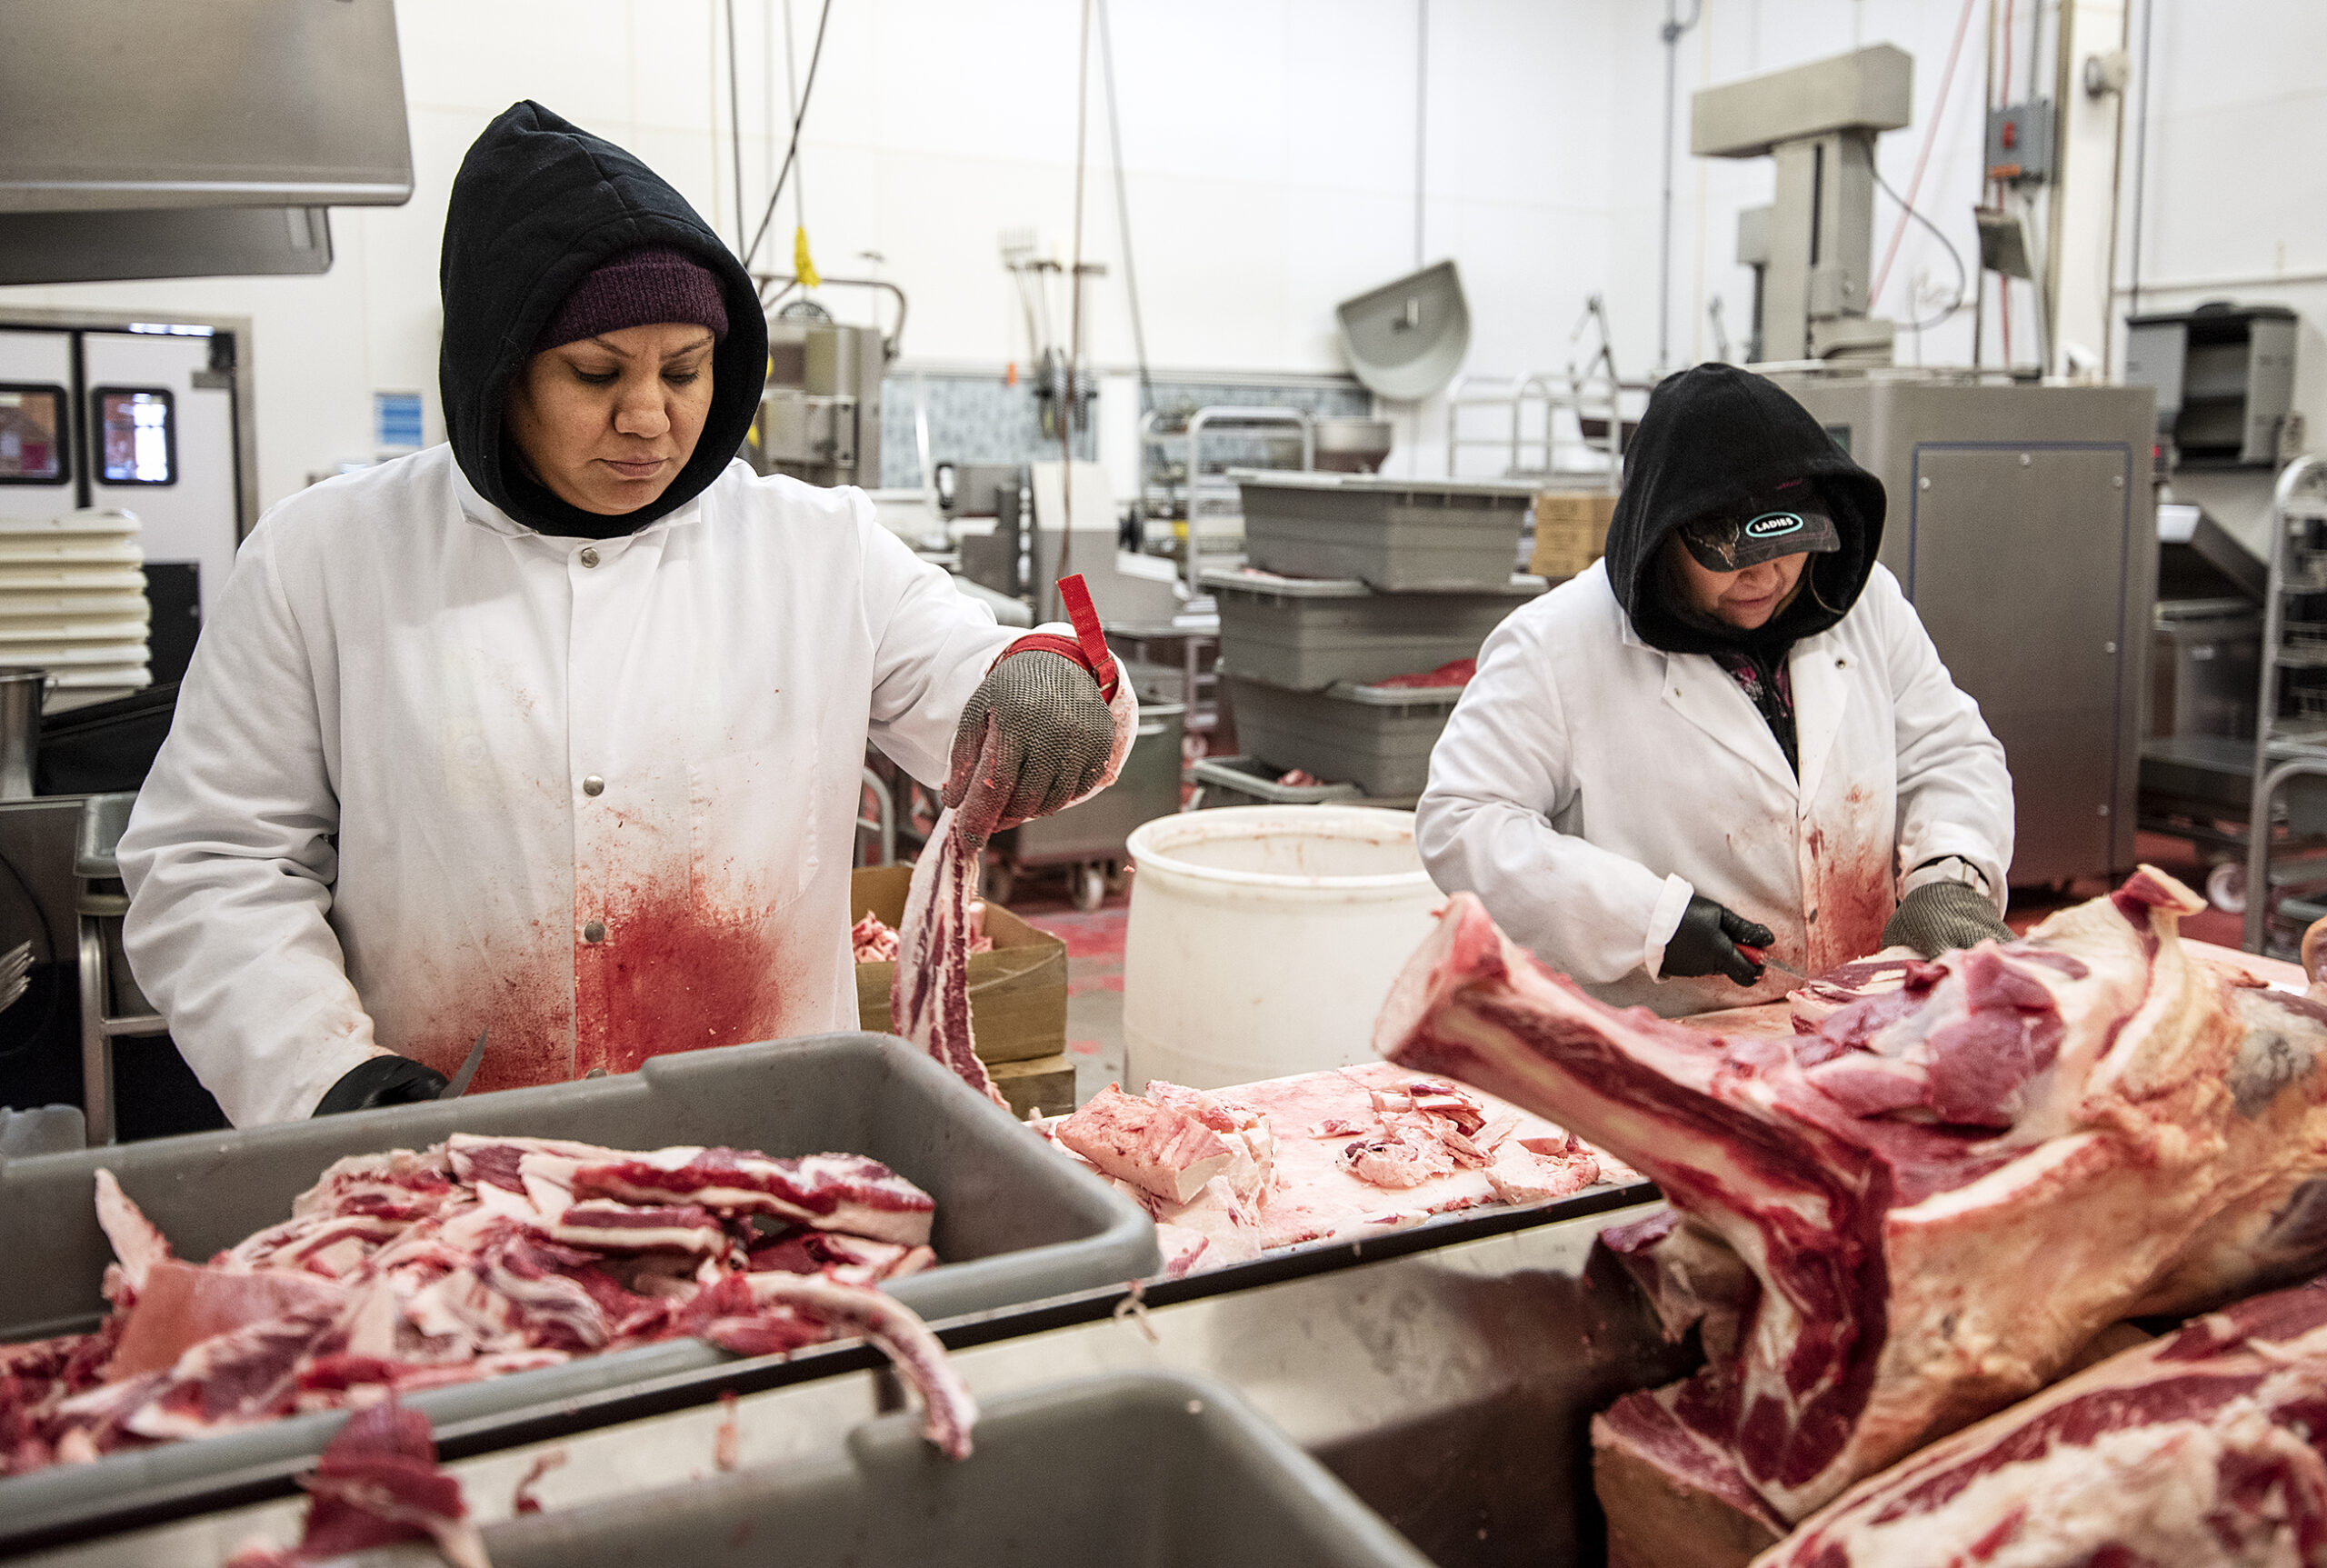 Two workers in white jackets and black hoodies separate pieces of raw meat on a large table.